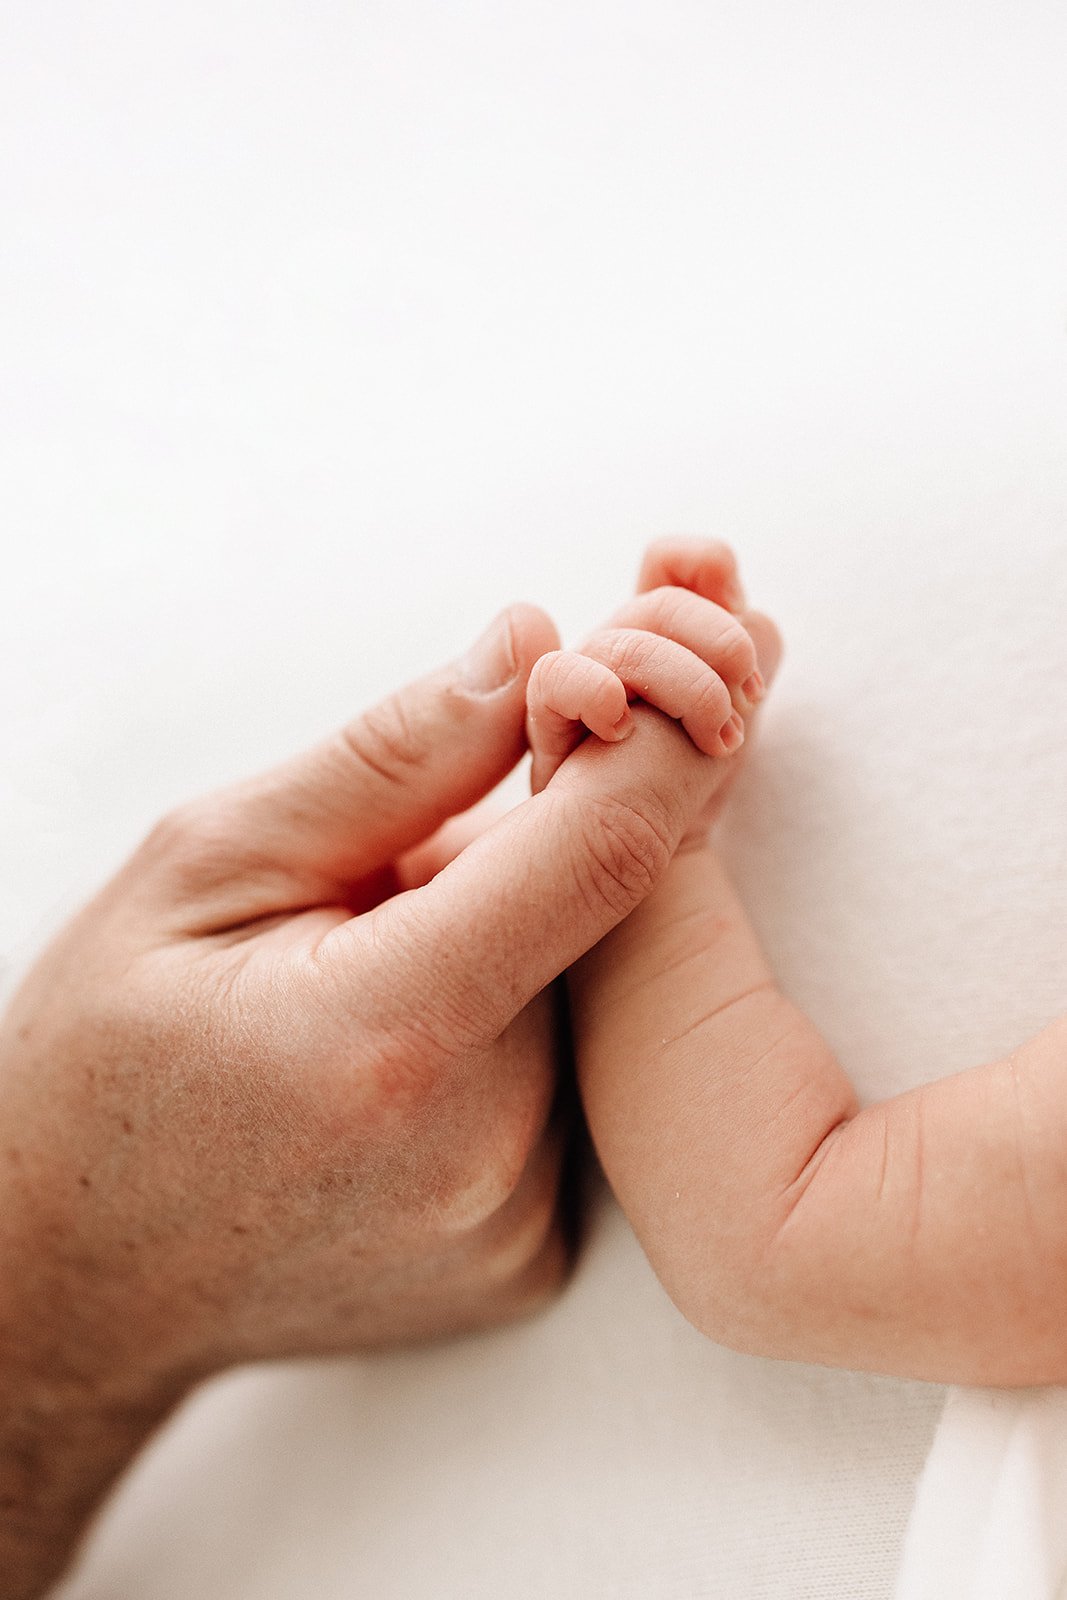 Details of a newborn baby holding dad's finger